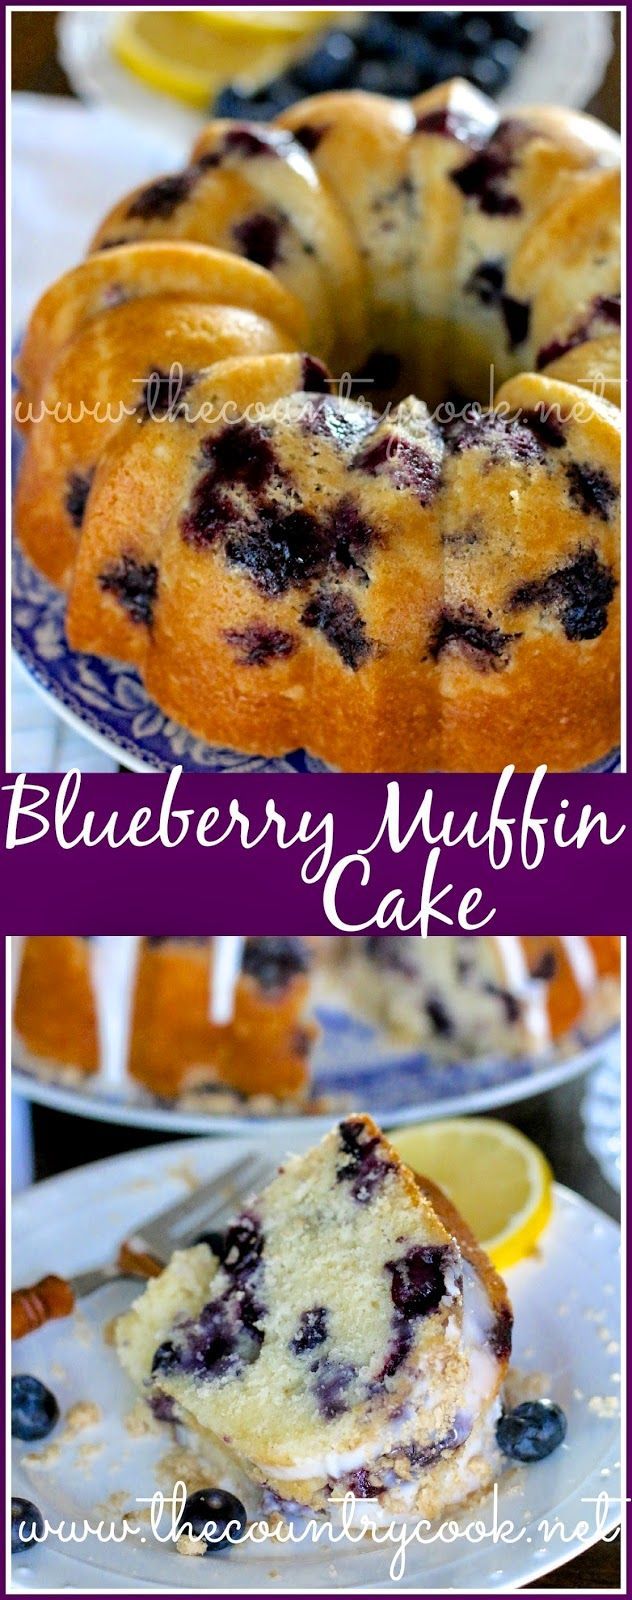 Blueberry Muffin Cake – one of THE BEST cakes Ive made in a long time. Homemade, moist & yummy with a hint of lemon – so good!